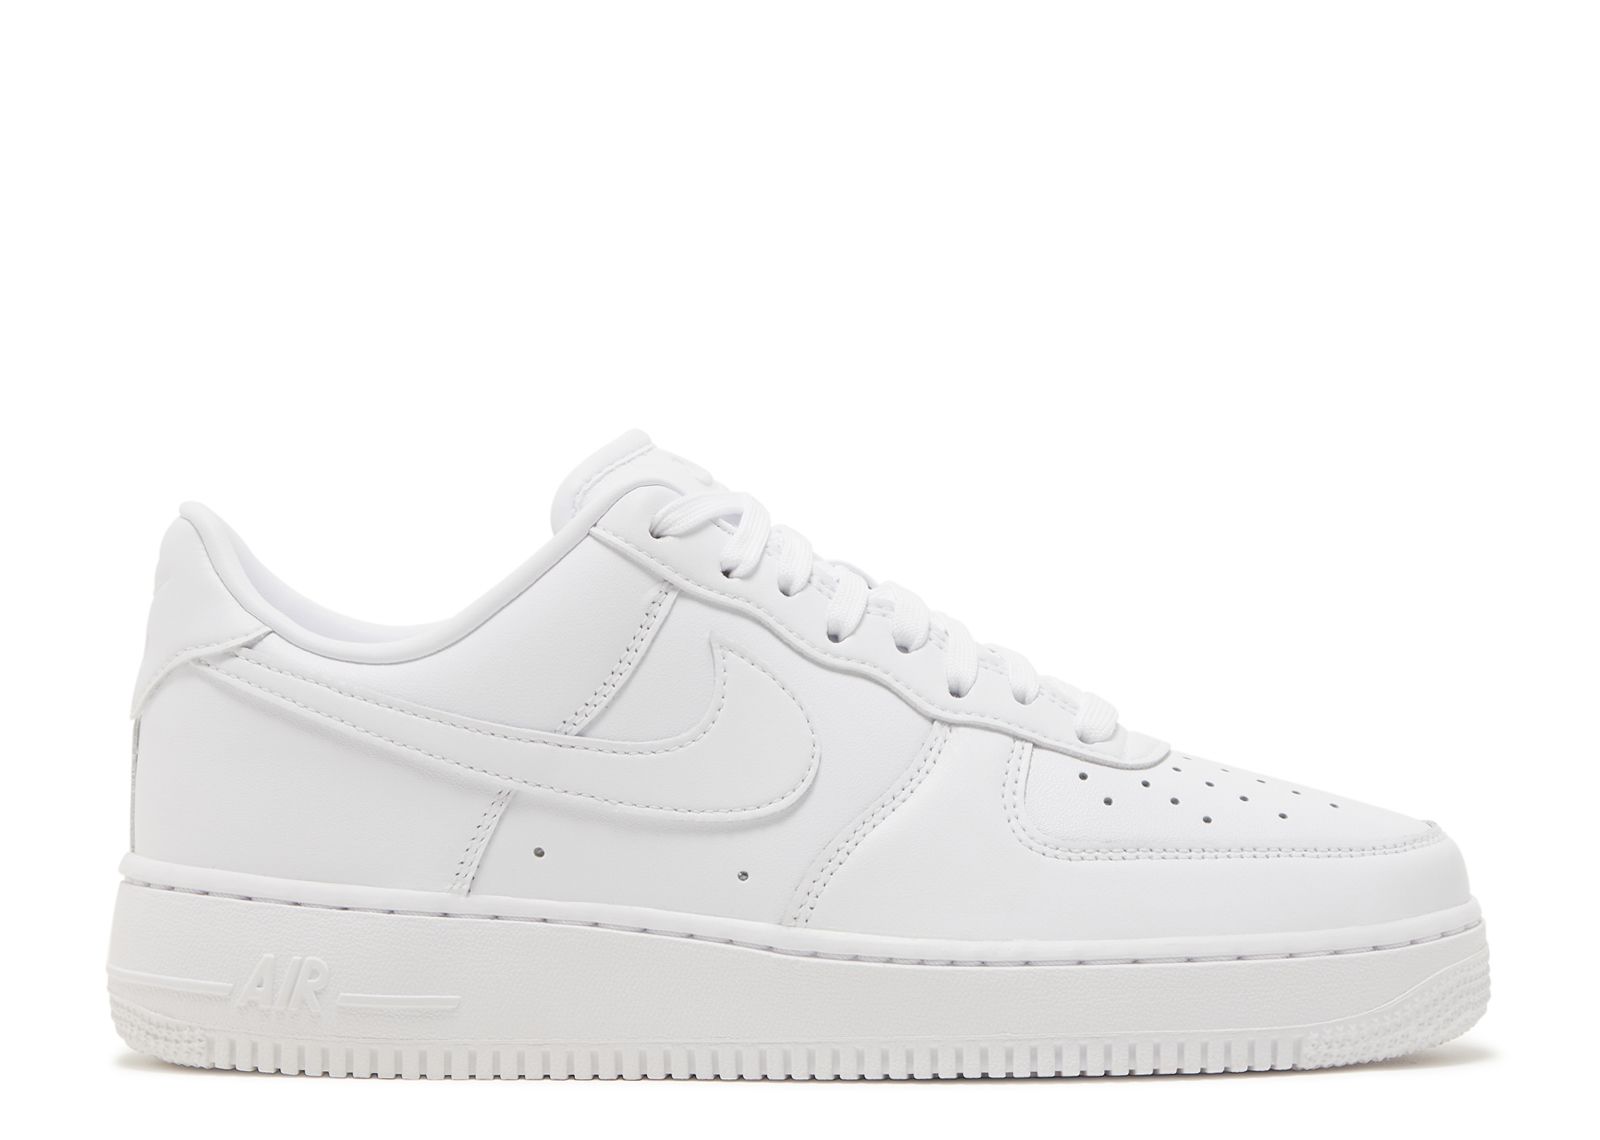 Fresh Looks at the Louis Vuitton x Nike Air Force 1 Collection By